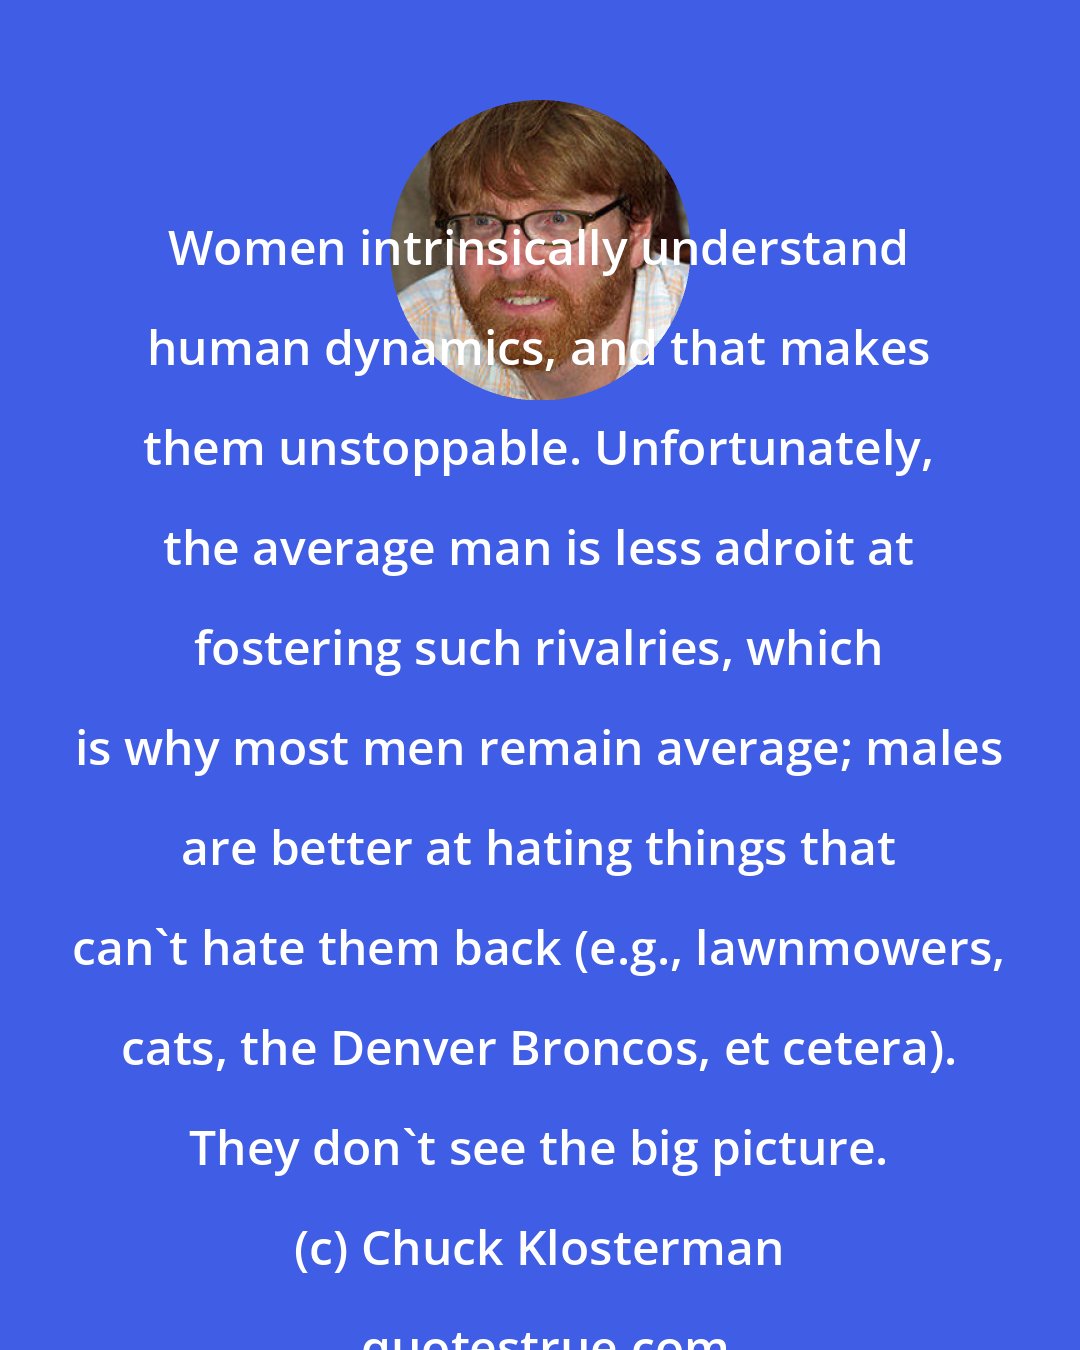 Chuck Klosterman: Women intrinsically understand human dynamics, and that makes them unstoppable. Unfortunately, the average man is less adroit at fostering such rivalries, which is why most men remain average; males are better at hating things that can't hate them back (e.g., lawnmowers, cats, the Denver Broncos, et cetera). They don't see the big picture.